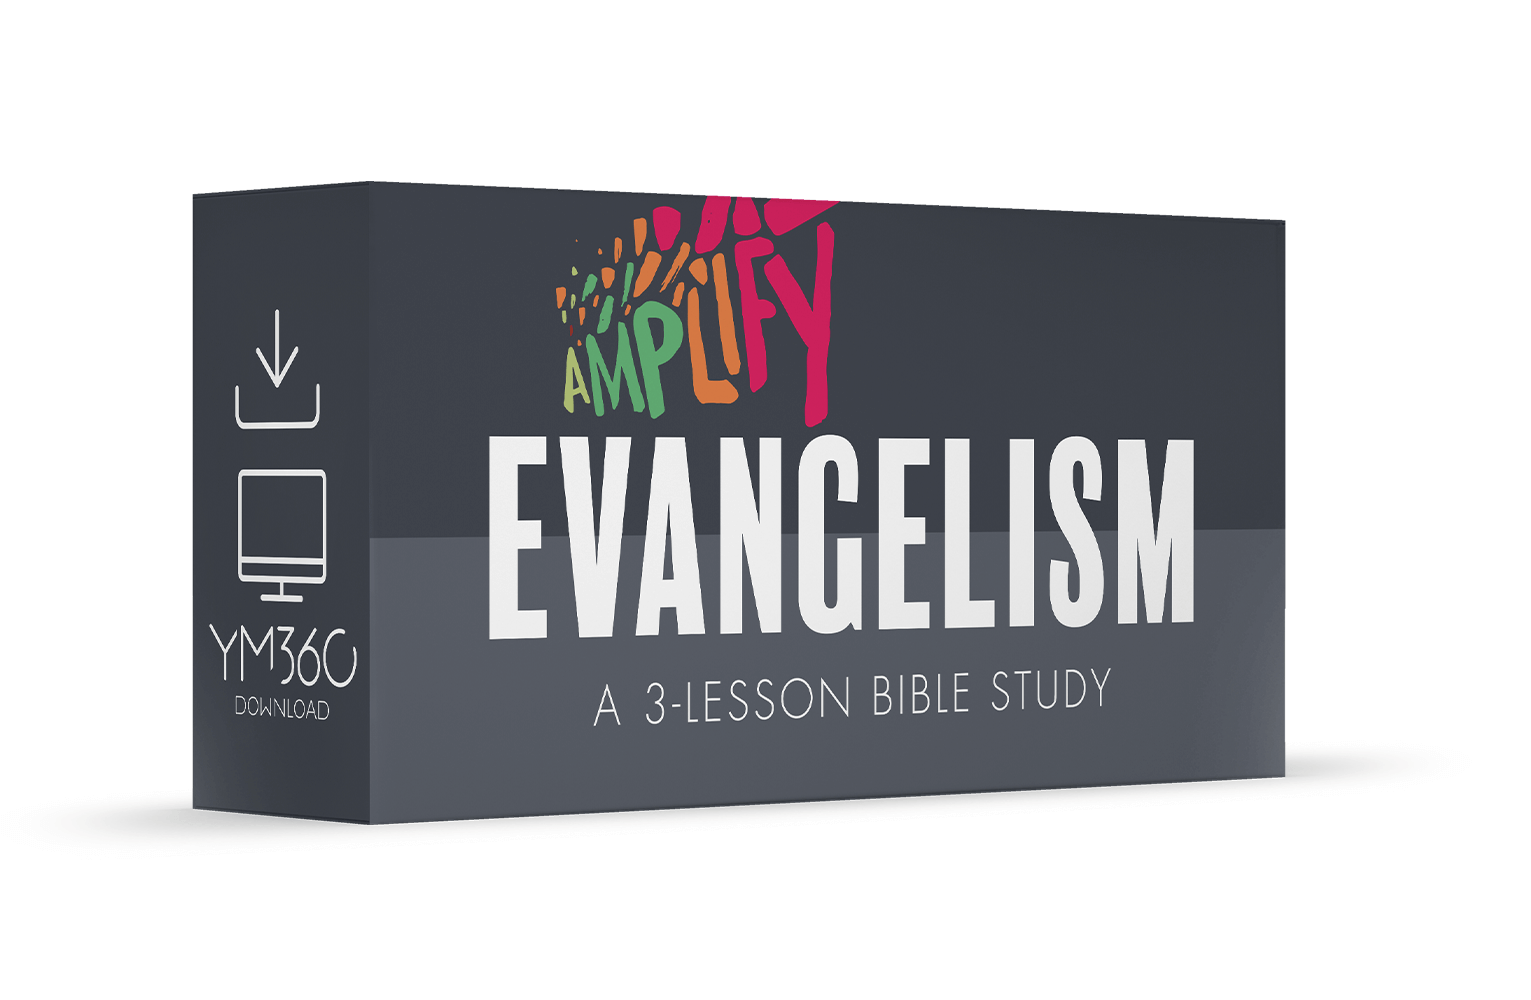 Evangelism: A 3-Lesson Bible Study